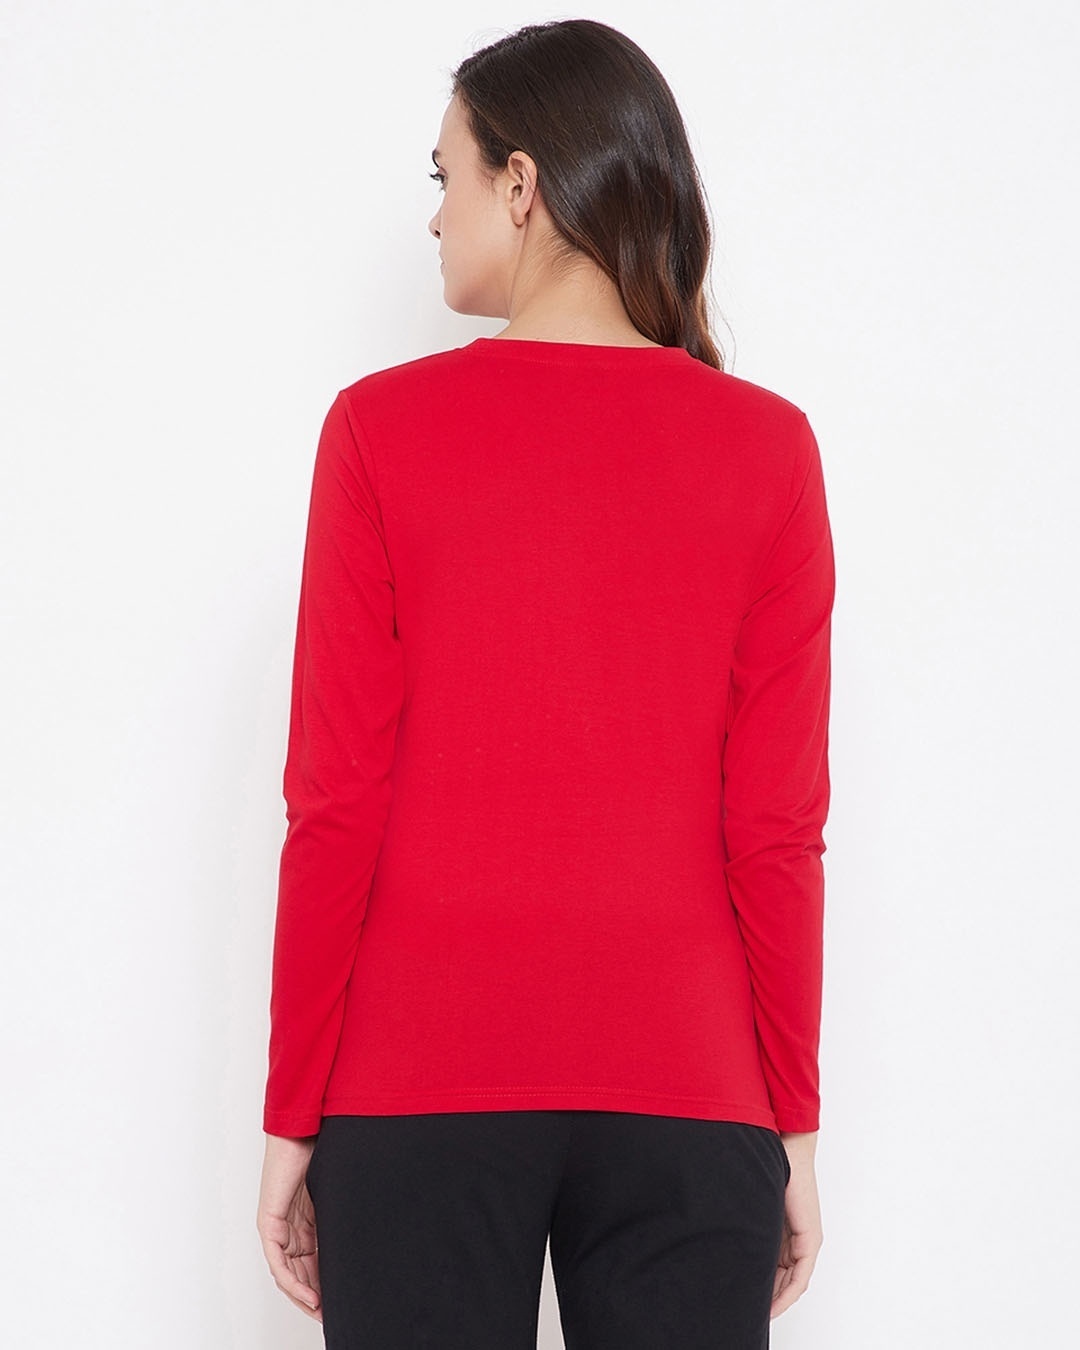 Shop Chic Basic Sleep Top In Red   Cotton-Back